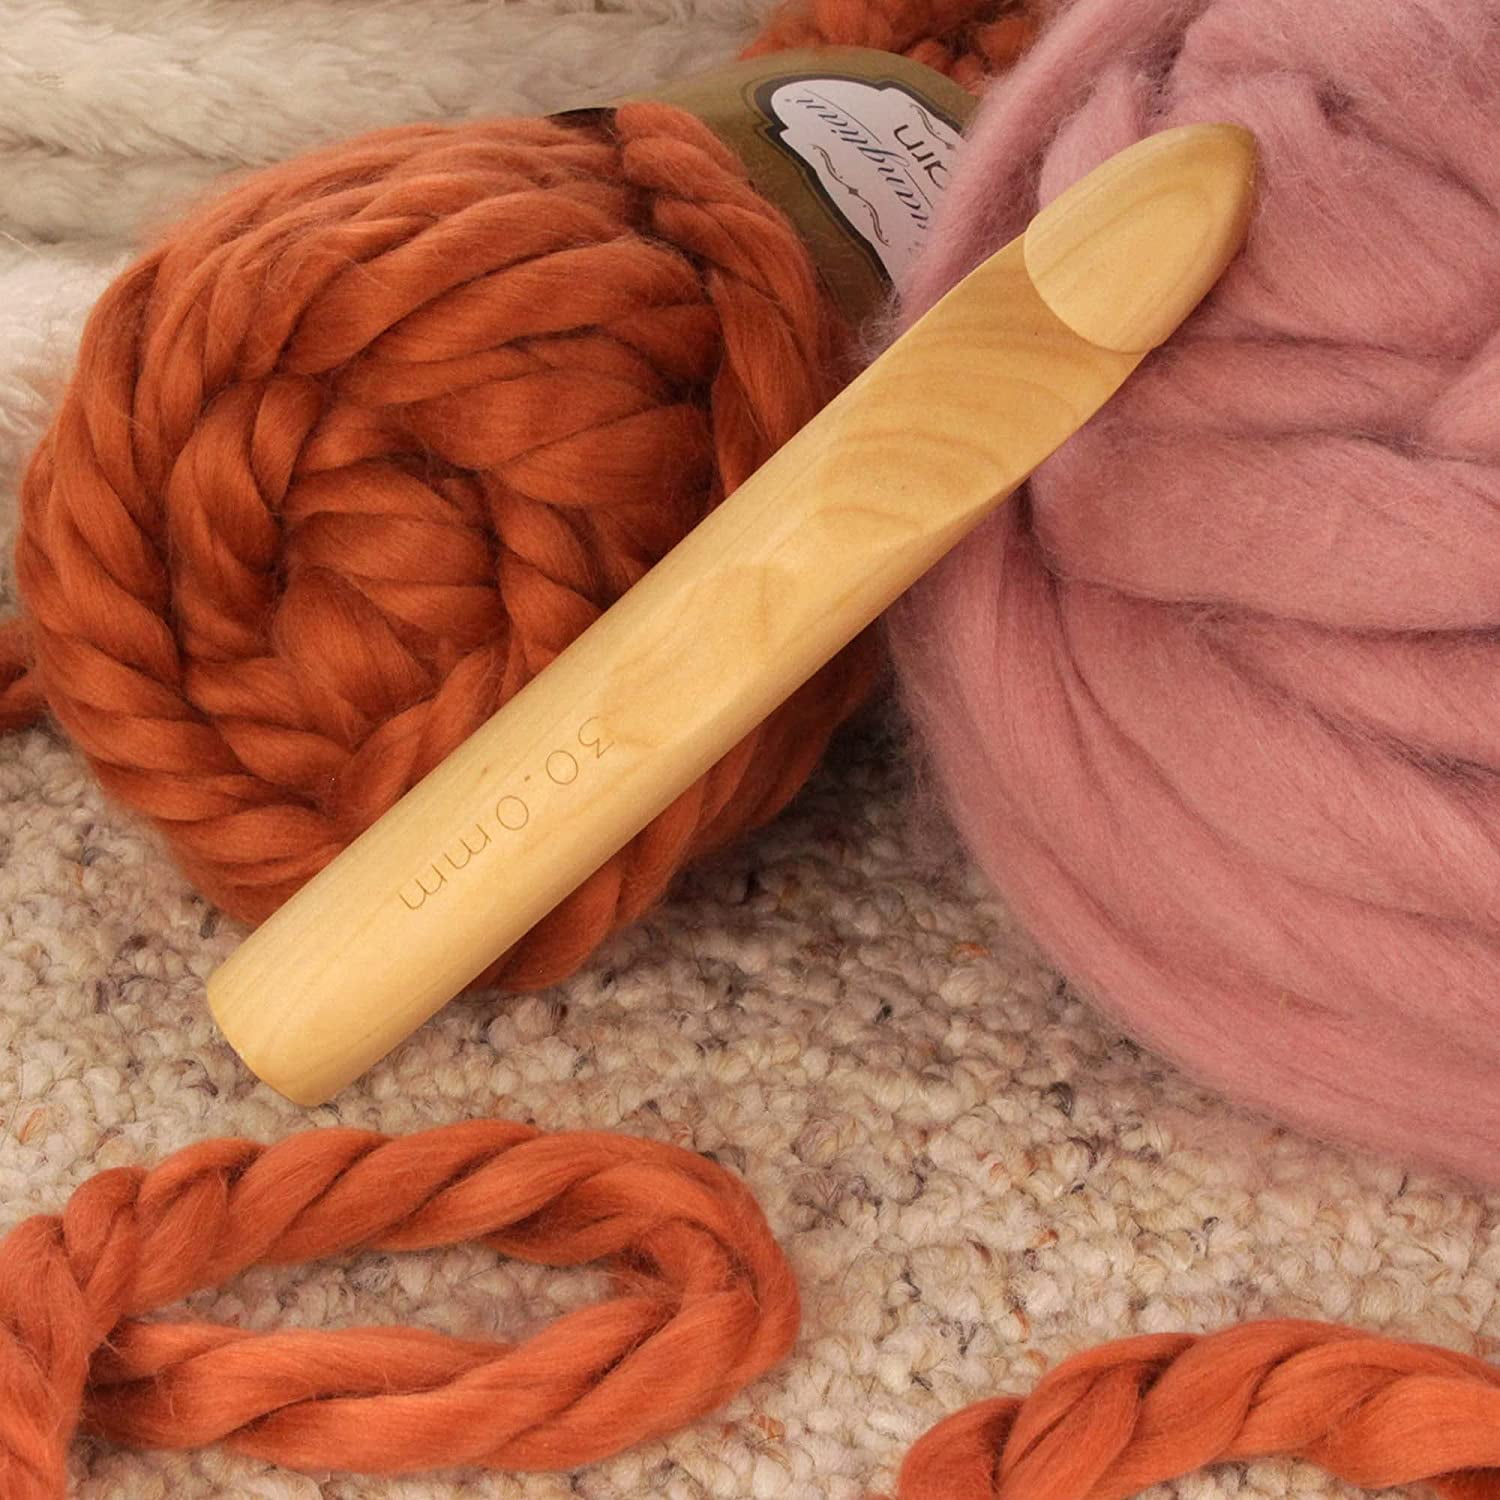 Extreme Crocheting: Jumbo Weight 7 Yarn with a 15mm Hook! [Video